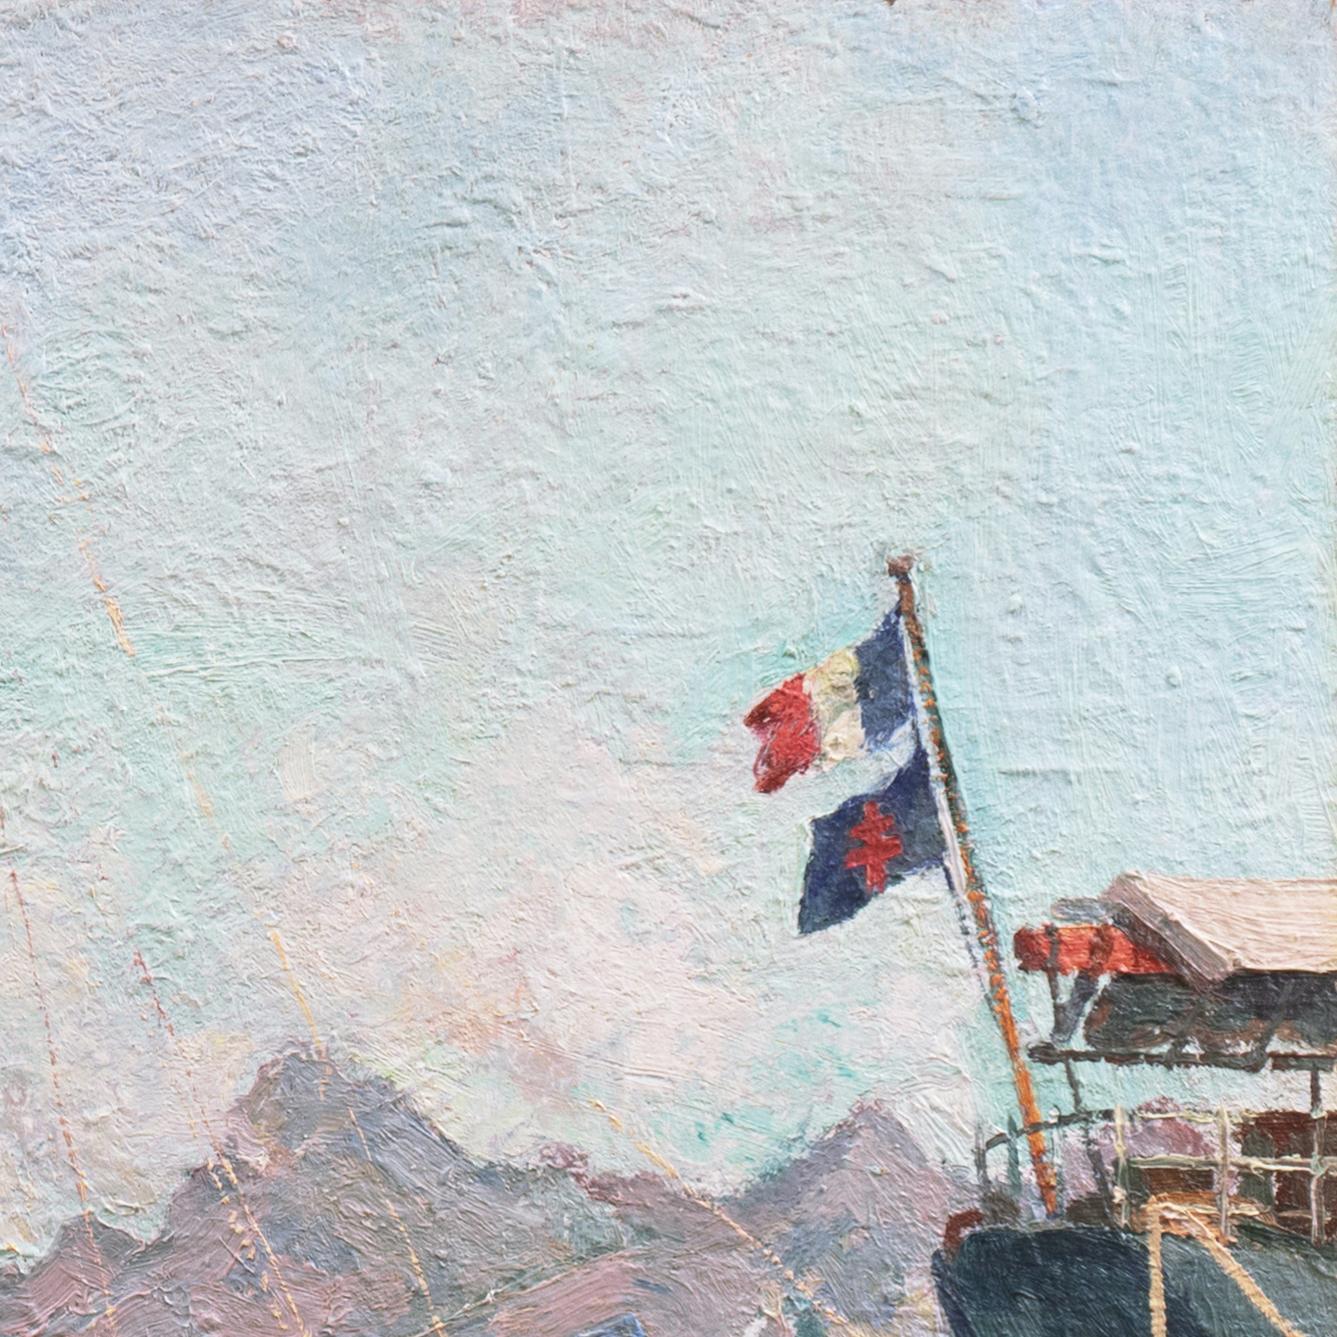 Signed lower left, 'J. Masson' for Jean Masson (French, 1900-1988) and painted circa 1945.

A substantial, mid-century oil showing a wooden schooner drawn up to a quay with a man on board reefing in a sail and a view beyond towards pink-tinged